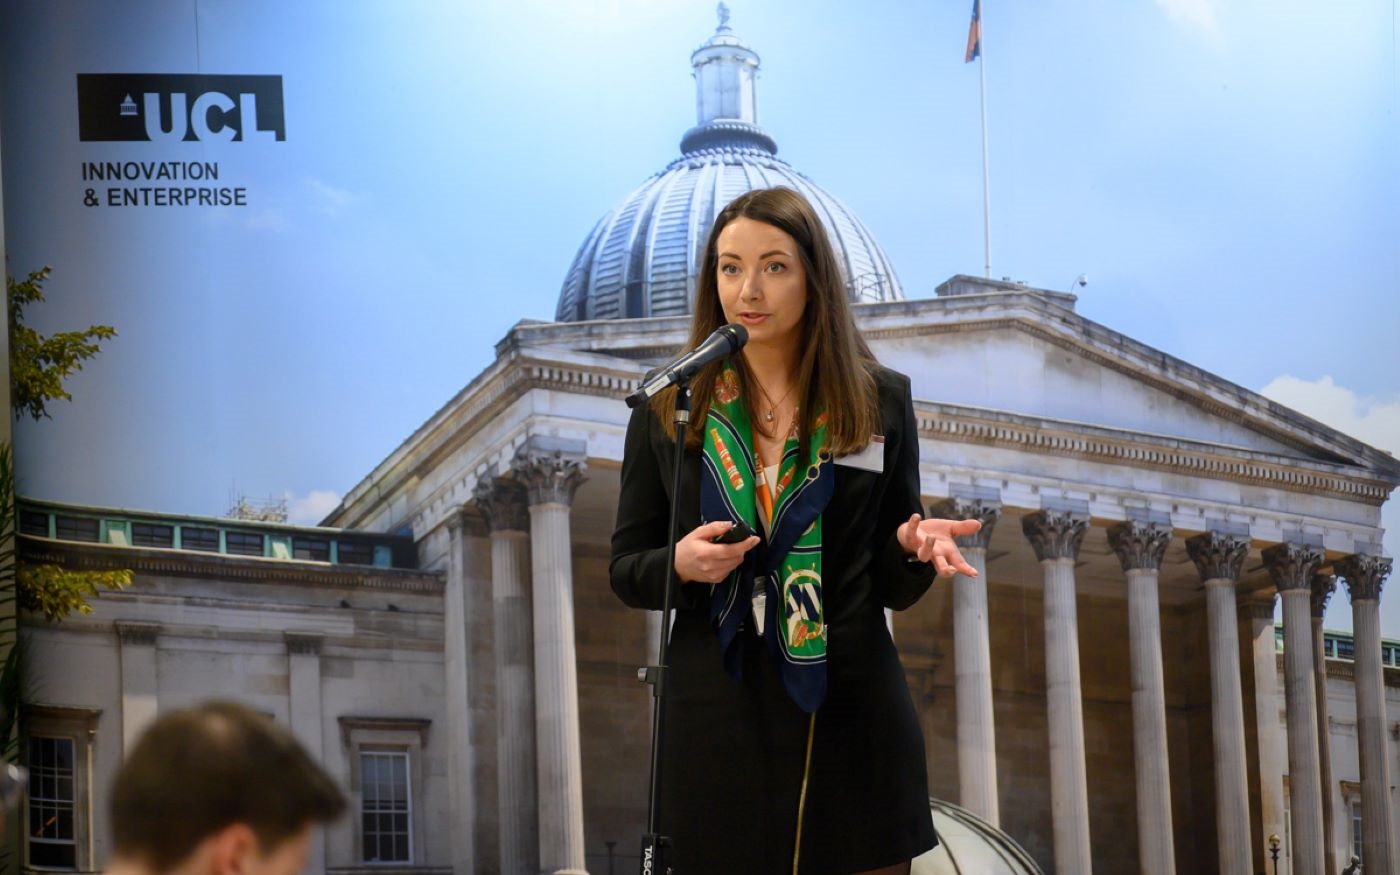 Photograph of Evelina Balt speaking with a microphone.